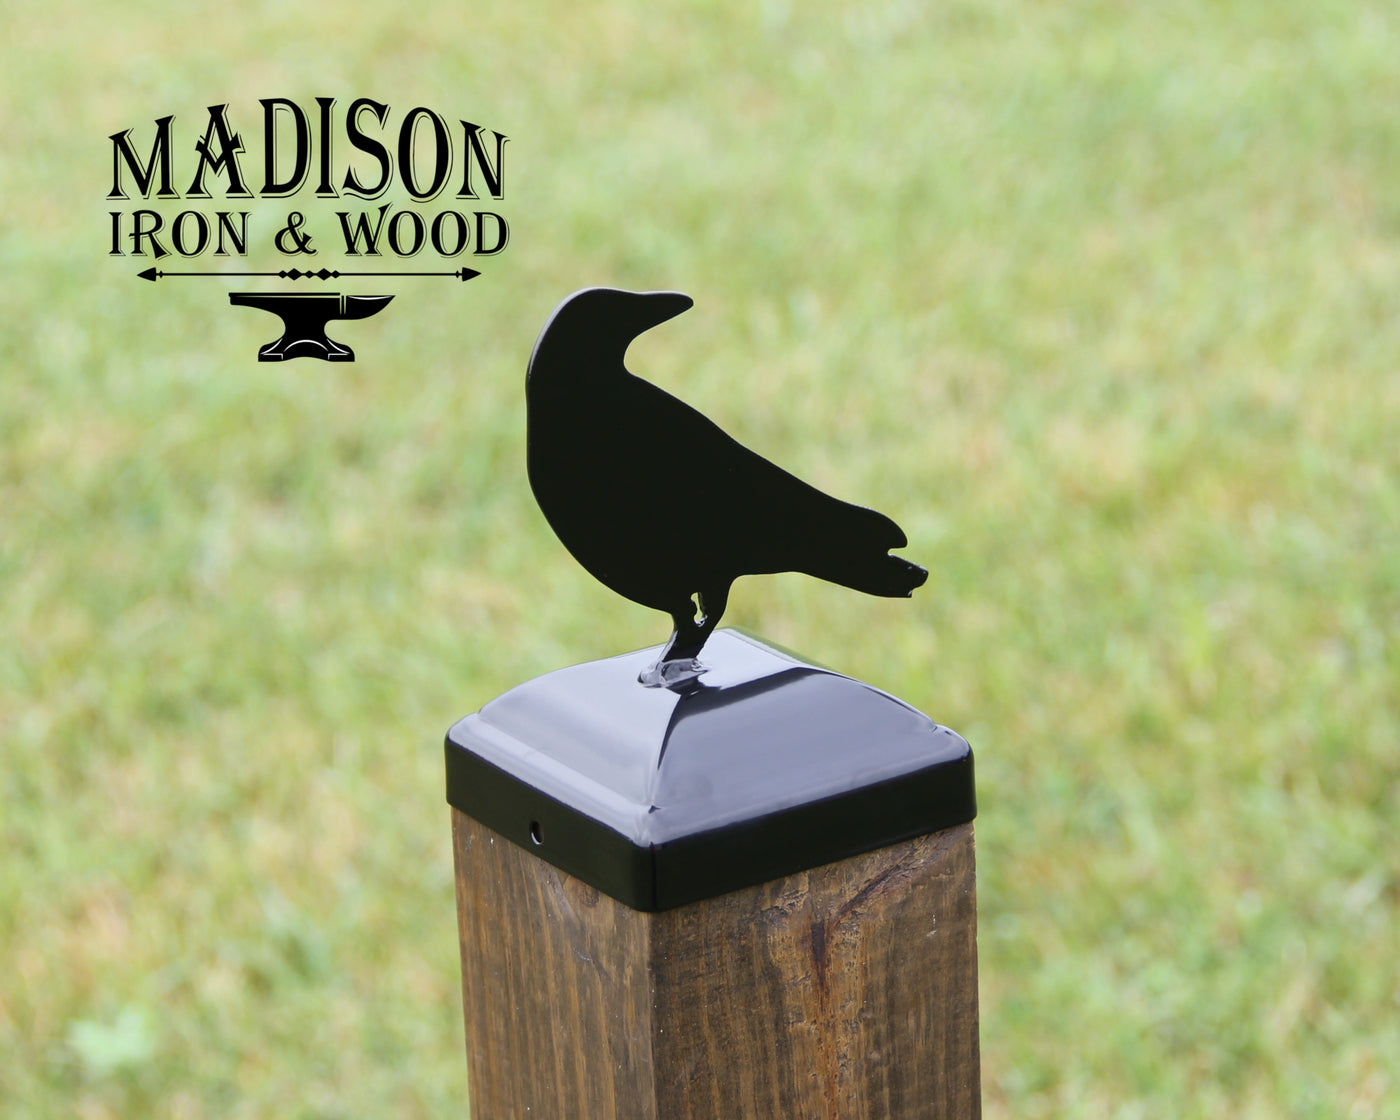 4X4 Raven Post Cap - Madison Iron and Wood - Post Cap - metal outdoor decor - Steel deocrations - american made products - veteran owned business products - fencing decorations - fencing supplies - custom wall decorations - personalized wall signs - steel - decorative post caps - steel post caps - metal post caps - brackets - structural brackets - home improvement - easter - easter decorations - easter gift - easter yard decor